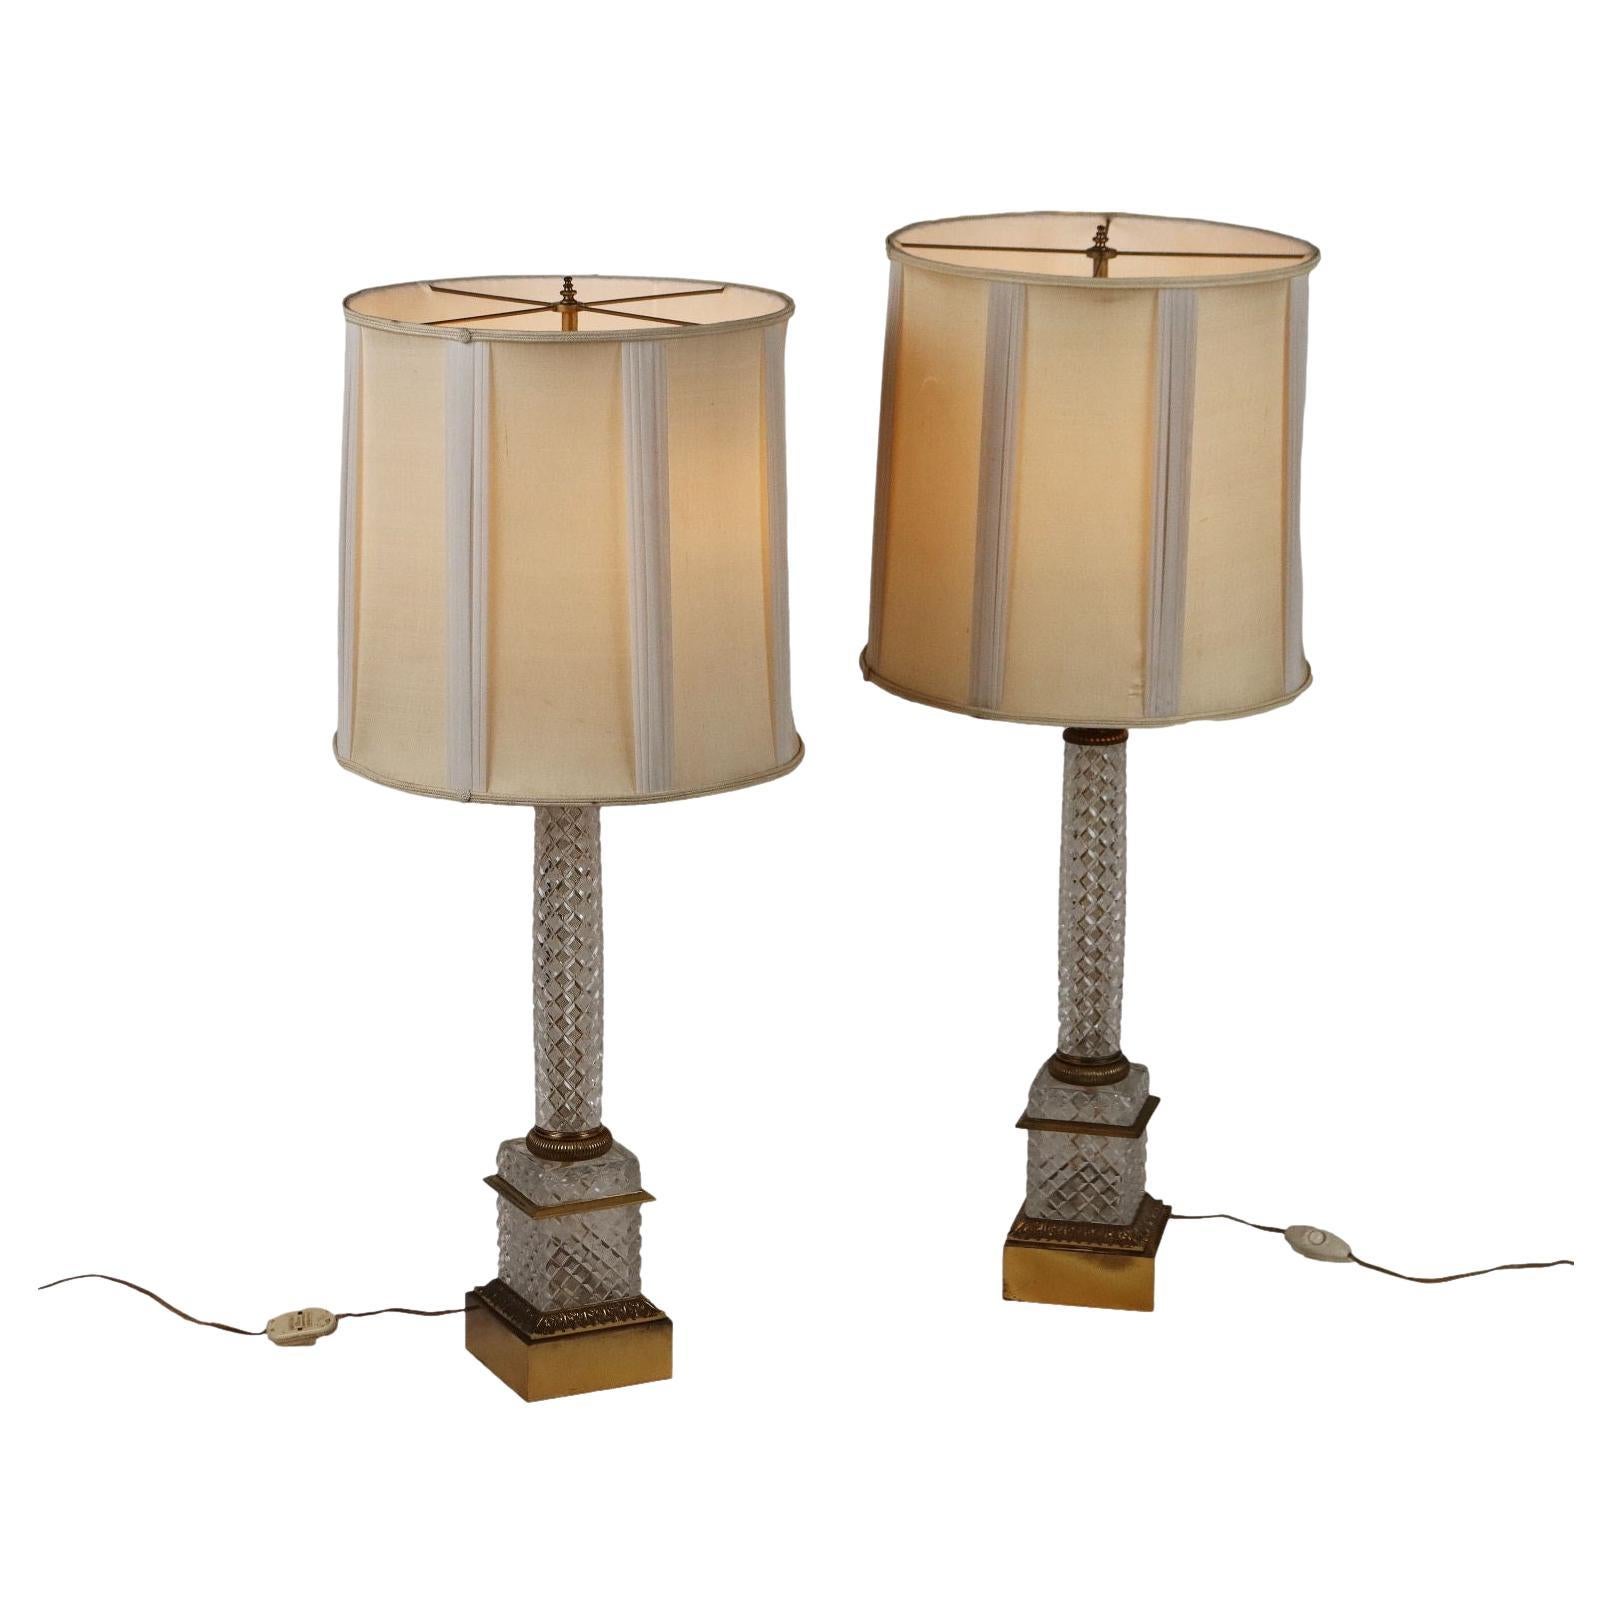 Pair of Cristal and Bronze Paris Lamps, France, Mid 1900s